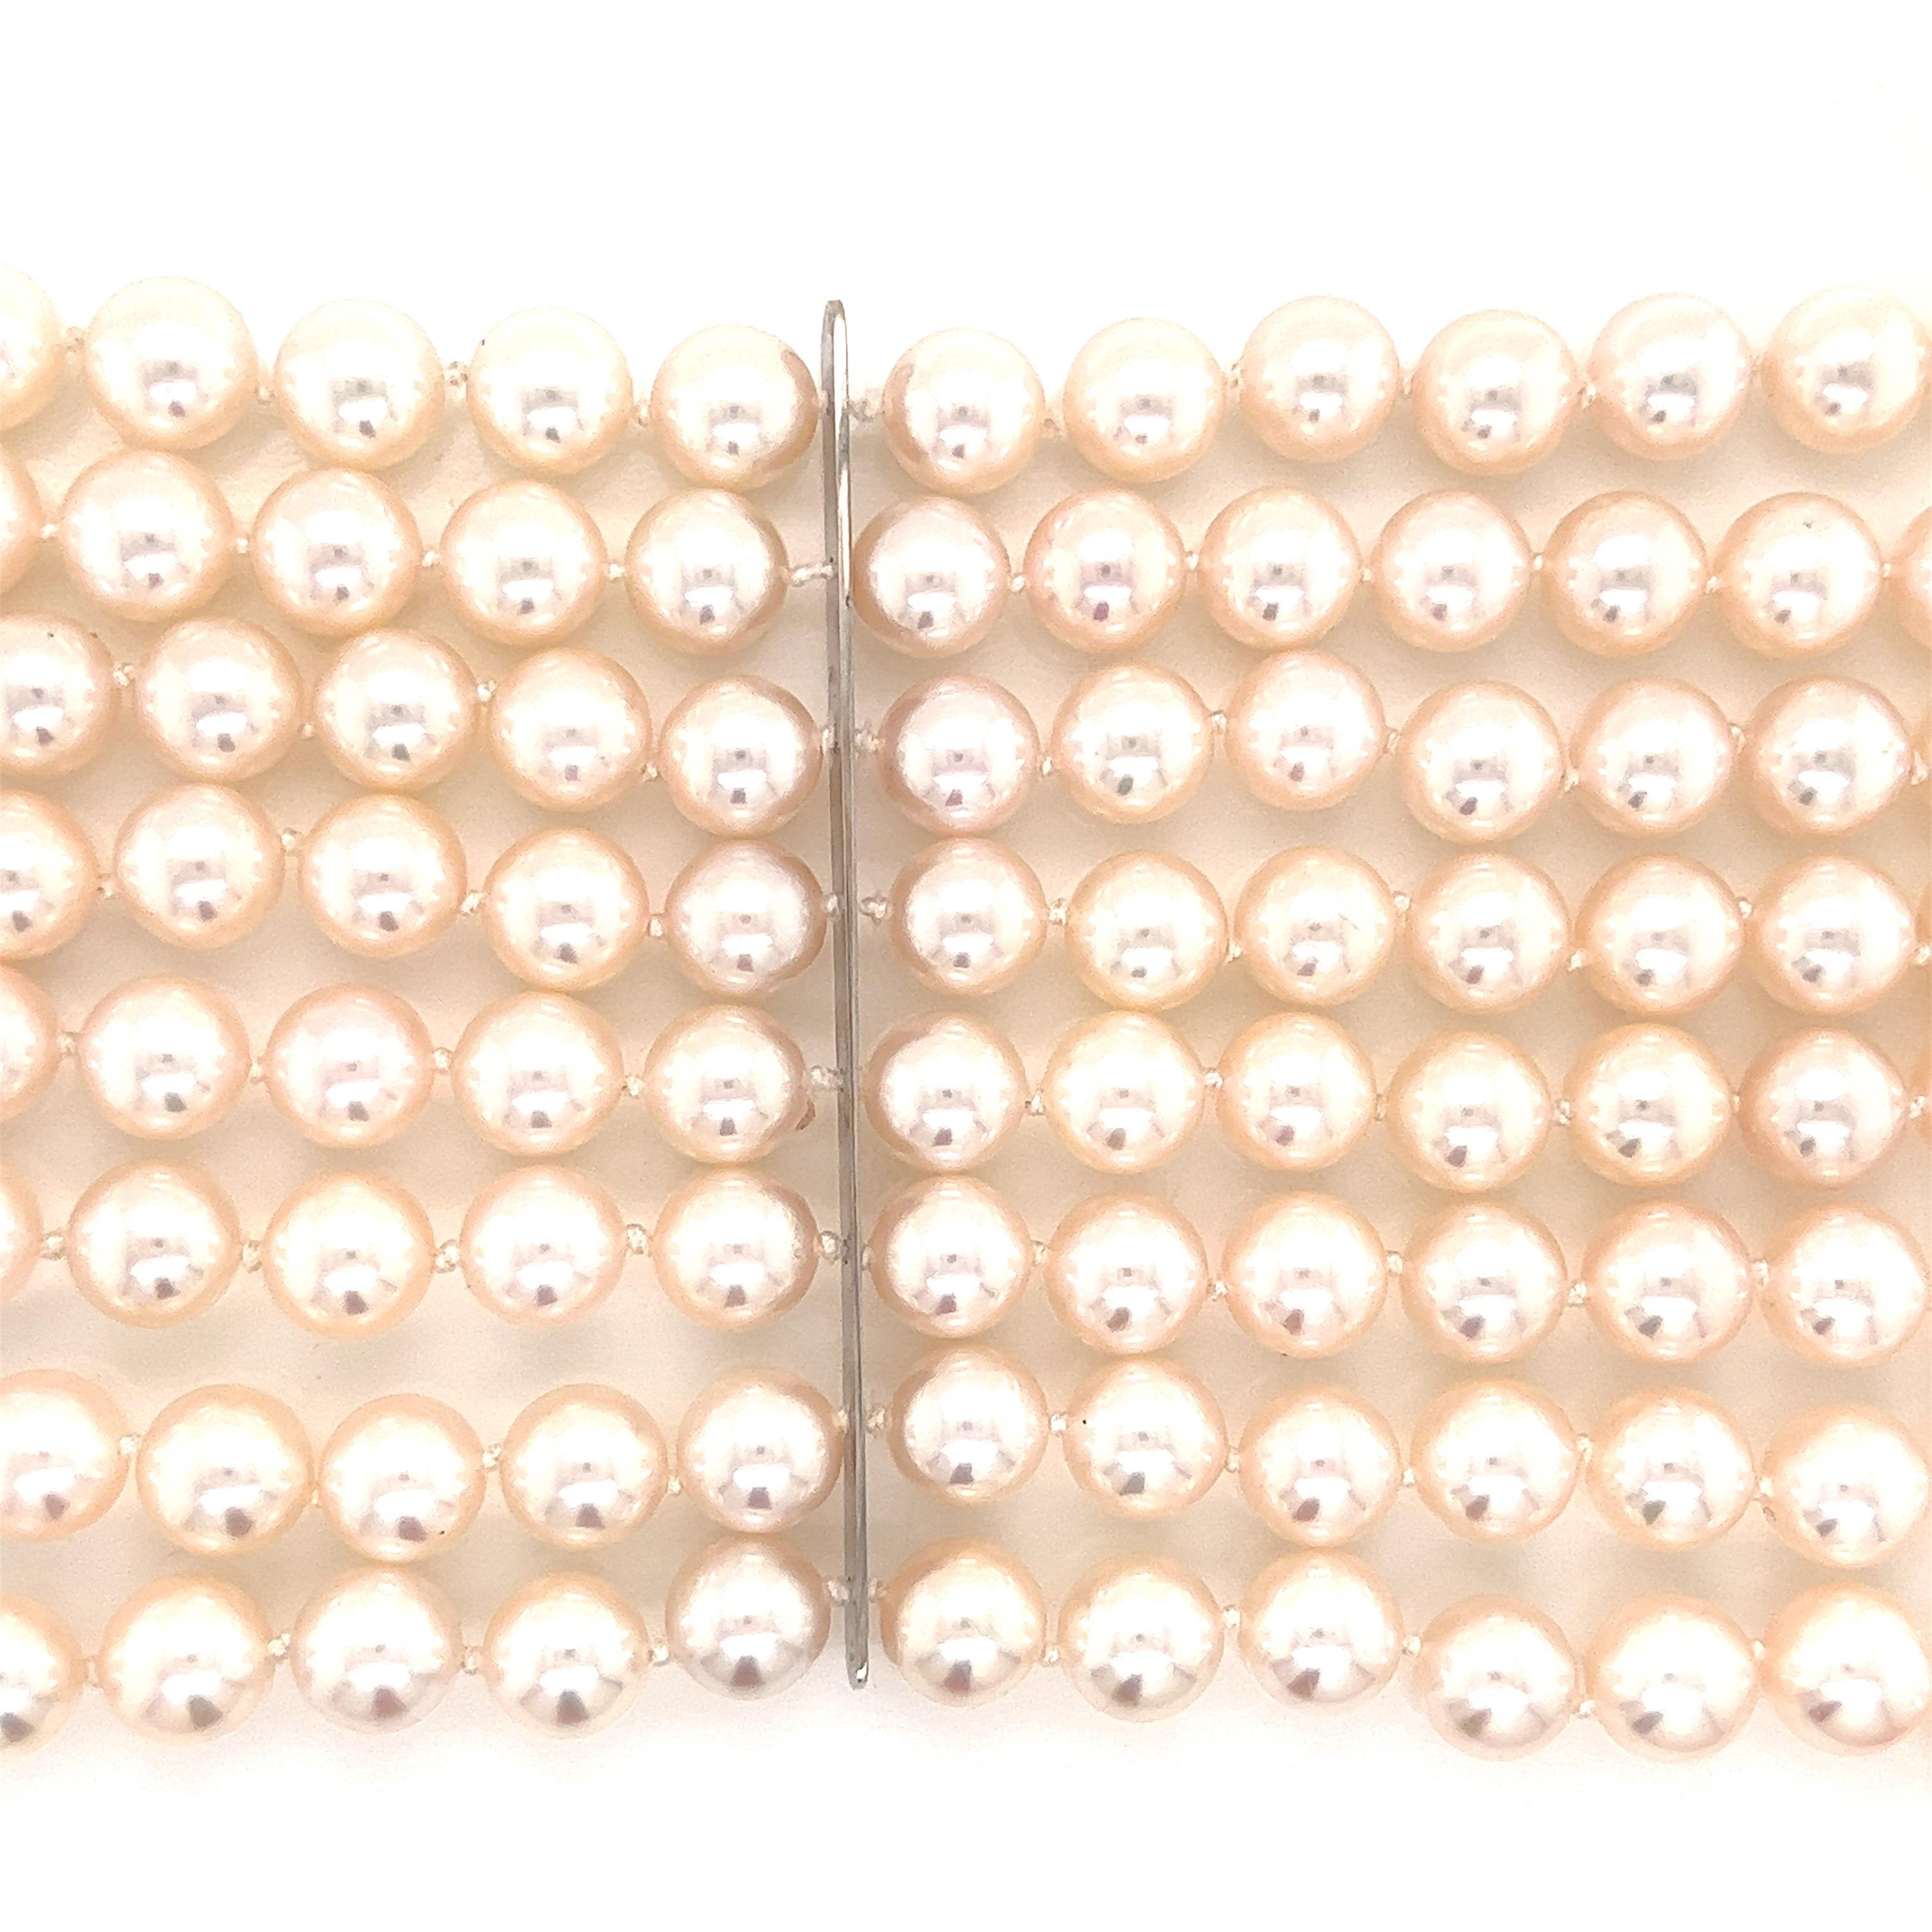 This extraordinary Assael vintage pearl and diamond bracelet is eight rows of 8-8.5 mm fine Japanese Akoya pearls. Set in 151.38 grams of 18 karat white gold.  The clasp. 1.18 ctw of round diamonds in a flower motif.  The bracelet is 7.5